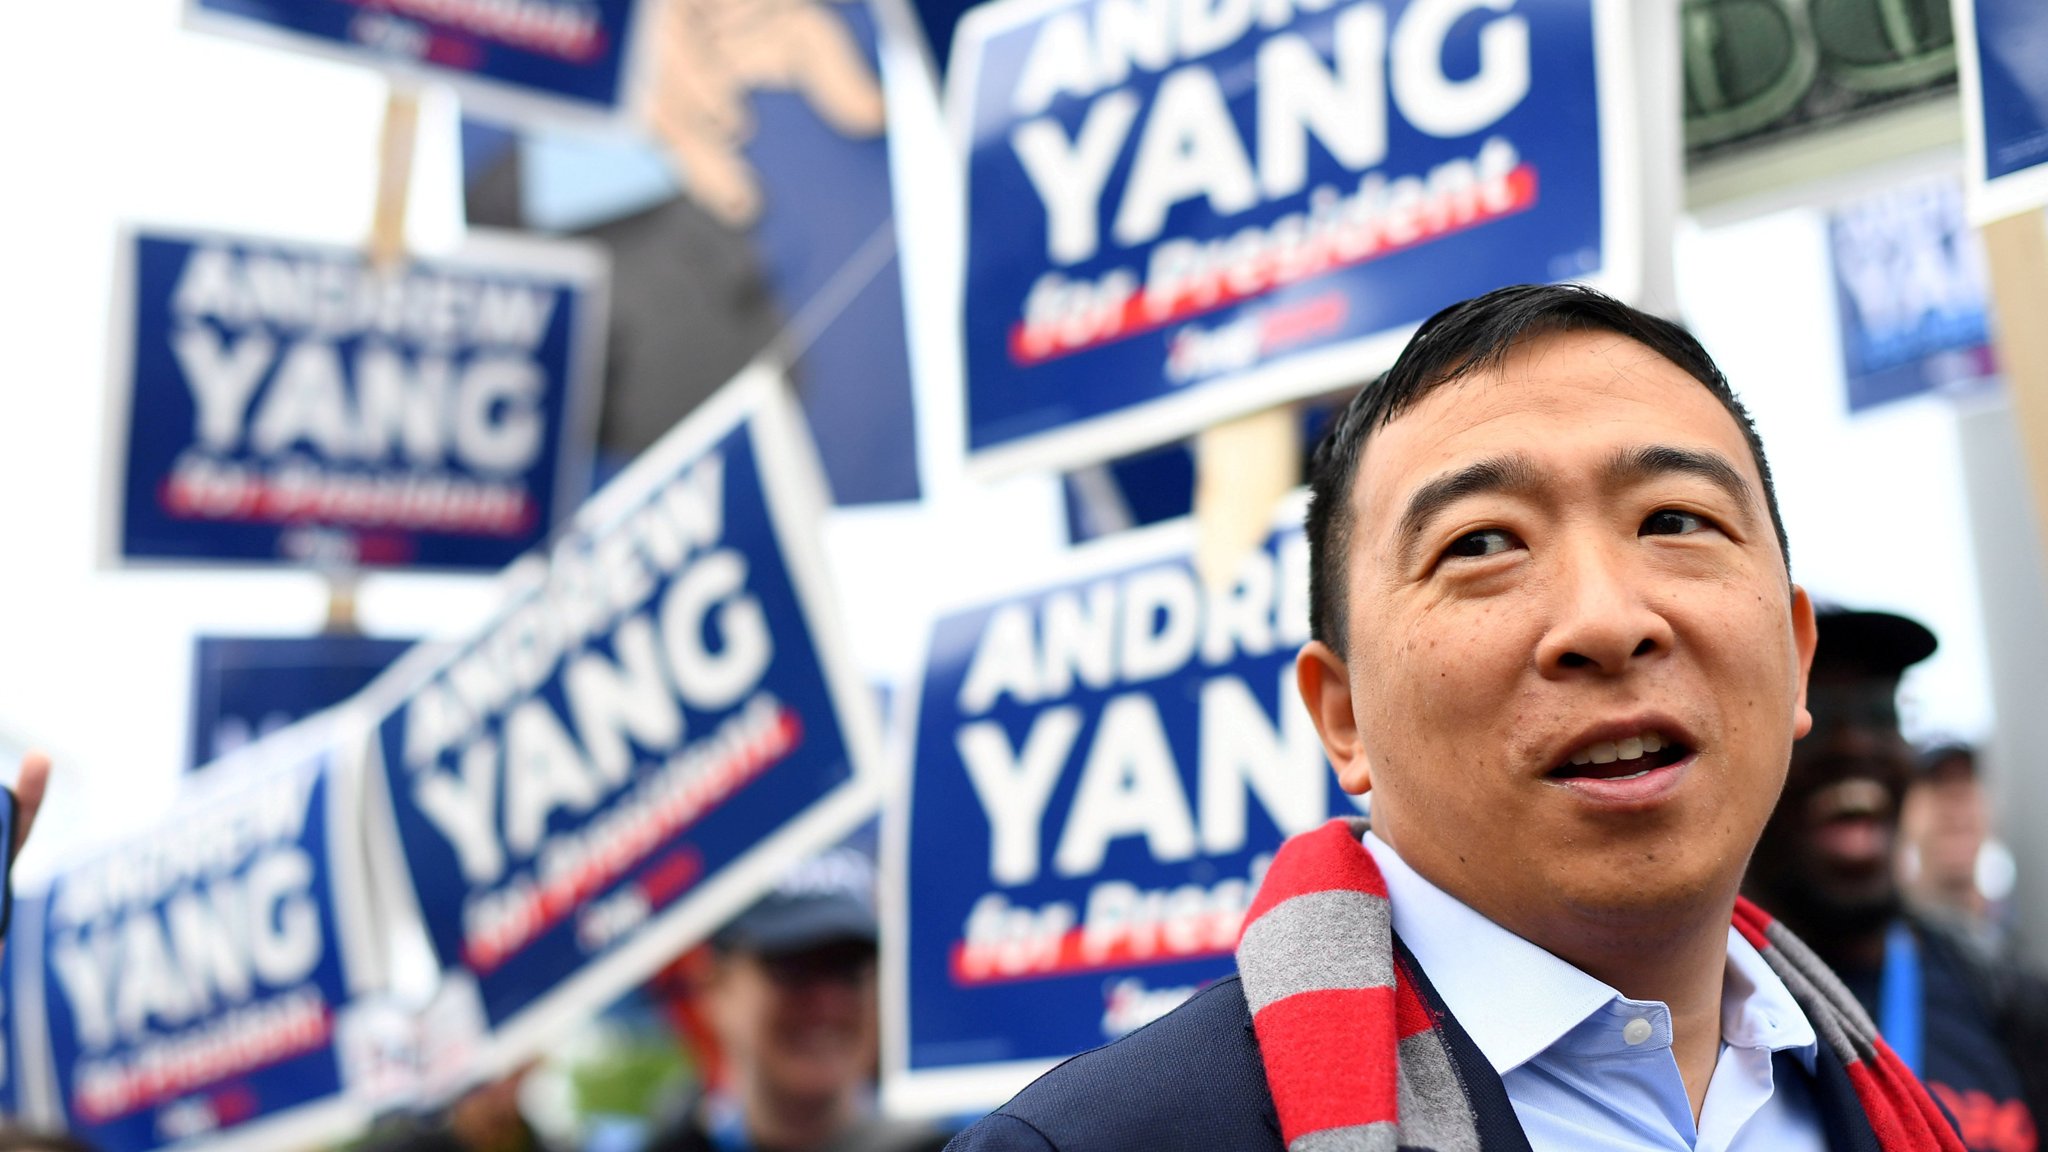 Andrew Yang for president? Meet Andrew Yang, the 2020 US Bitcoin-friendly presidential candidate